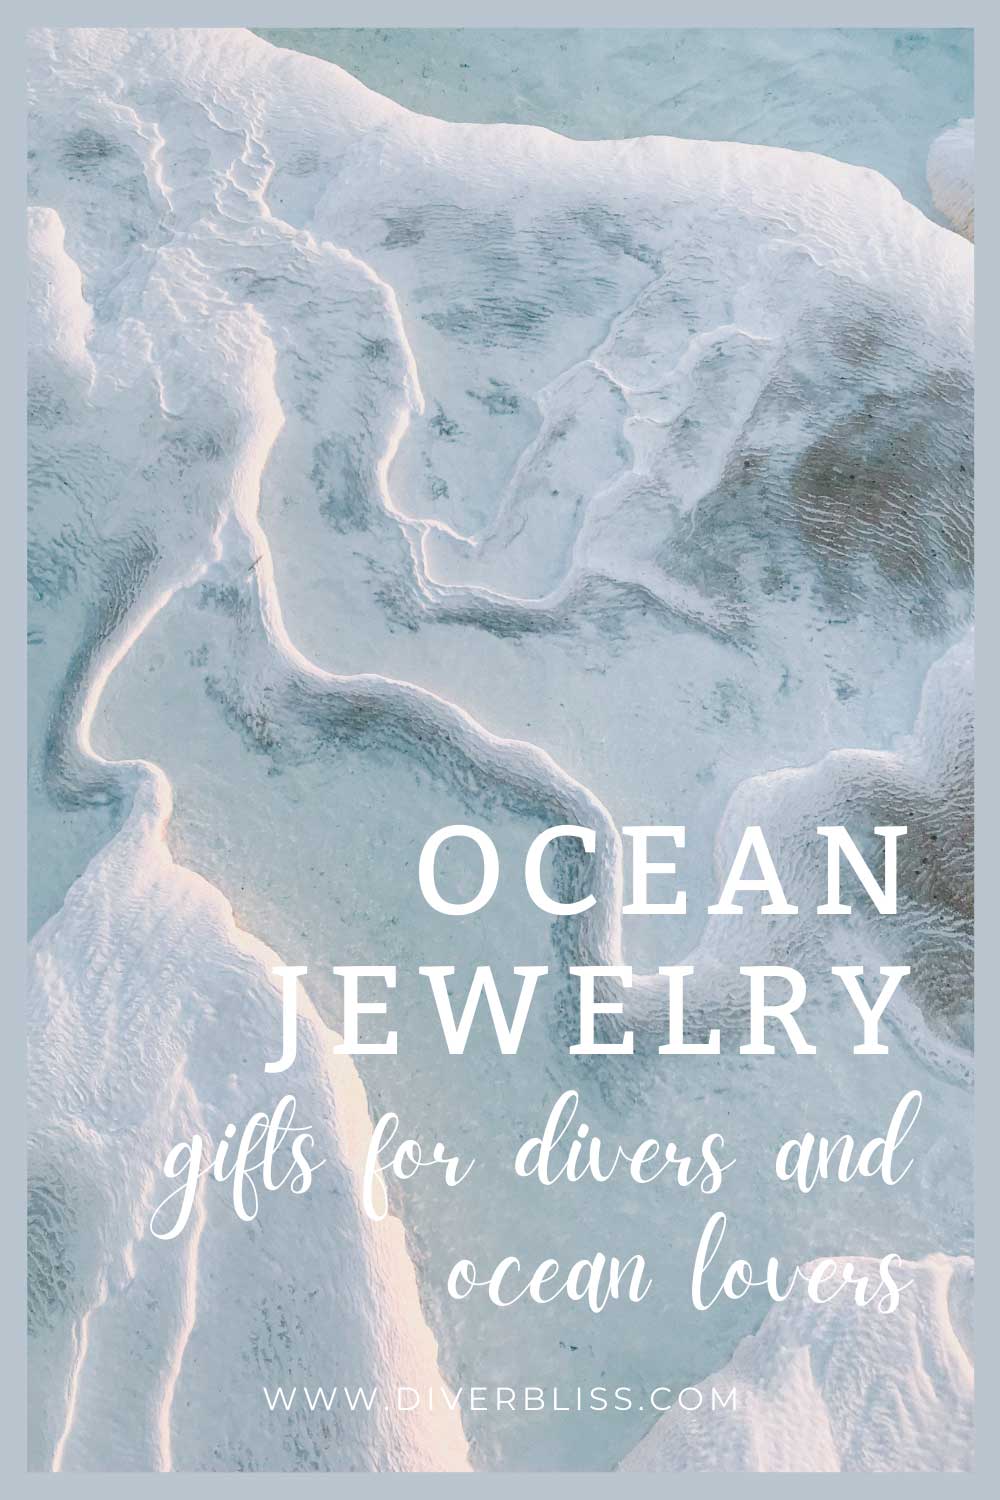 Ocean Jewelry, gifts for divers and ocean lovers